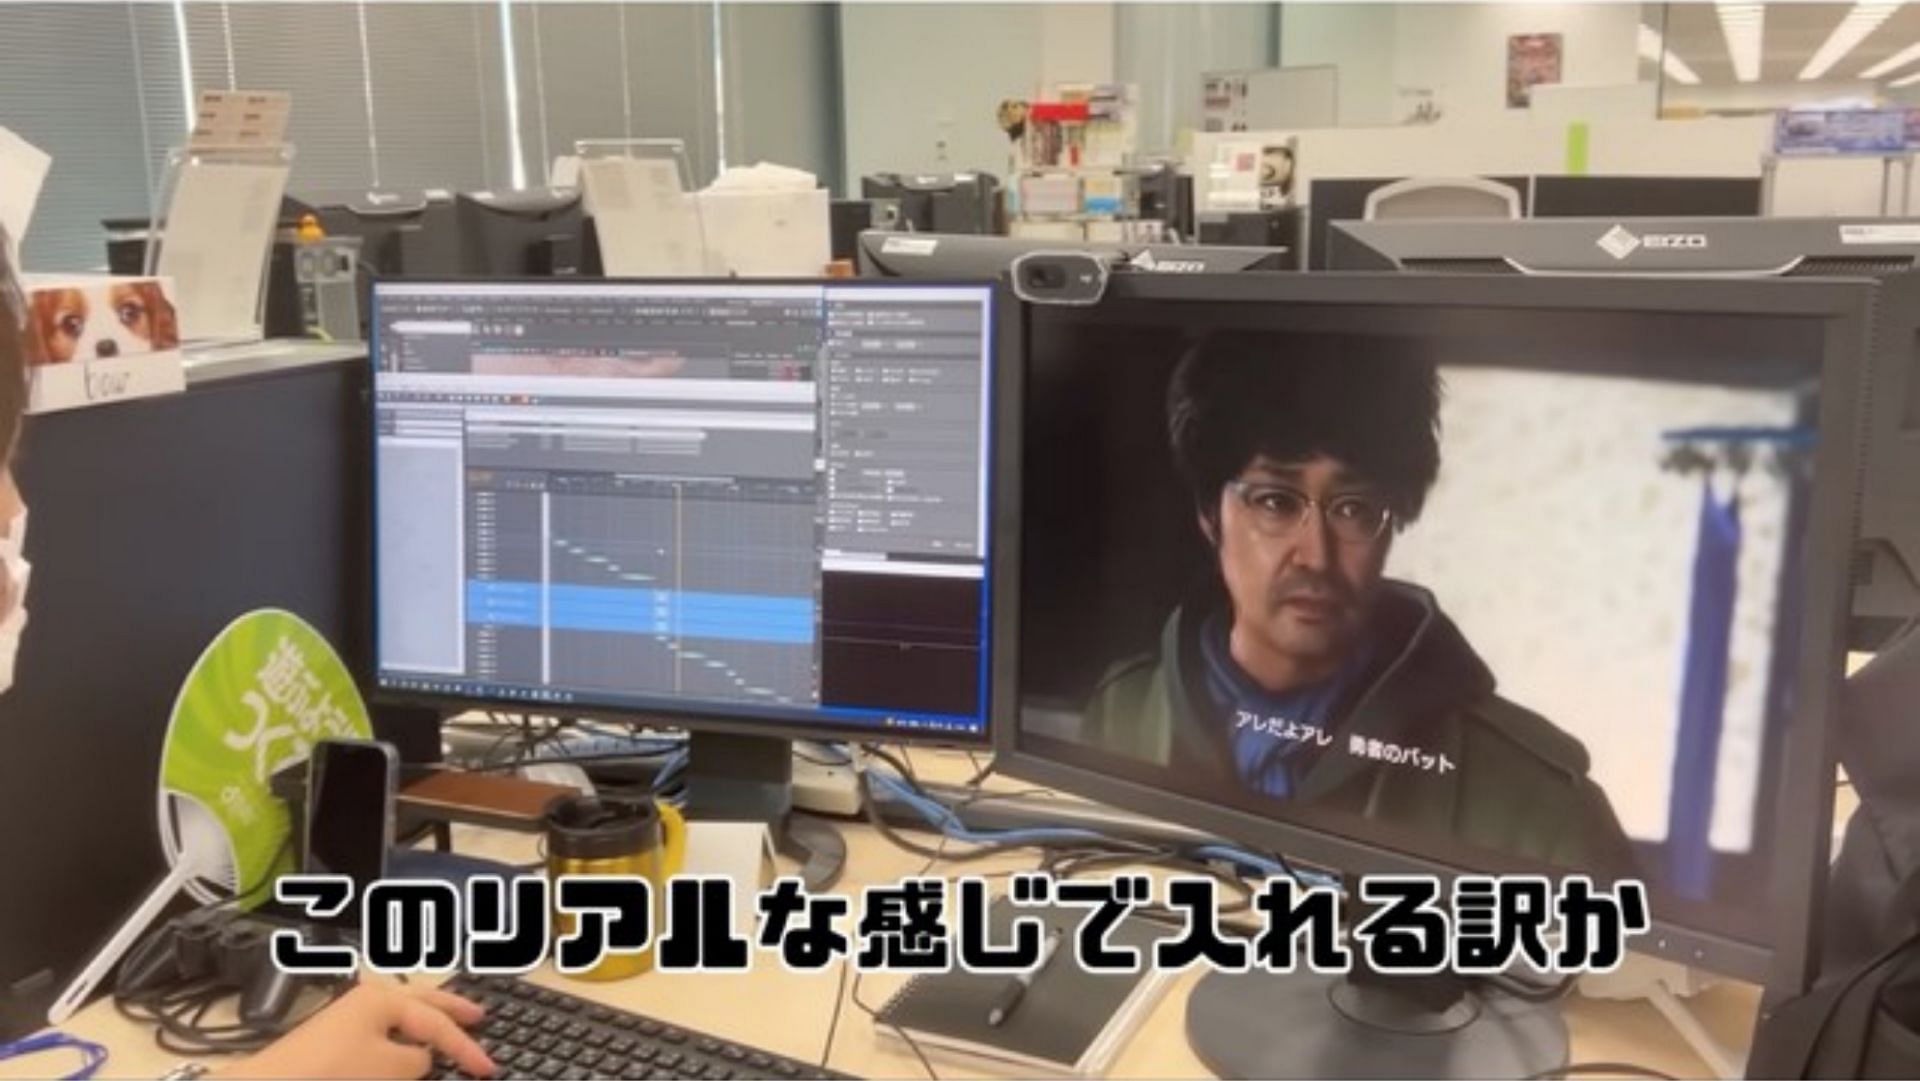 Yu Nanba was also seen in the video, confirming he will at least appear in some fashion (Image via YouTube)